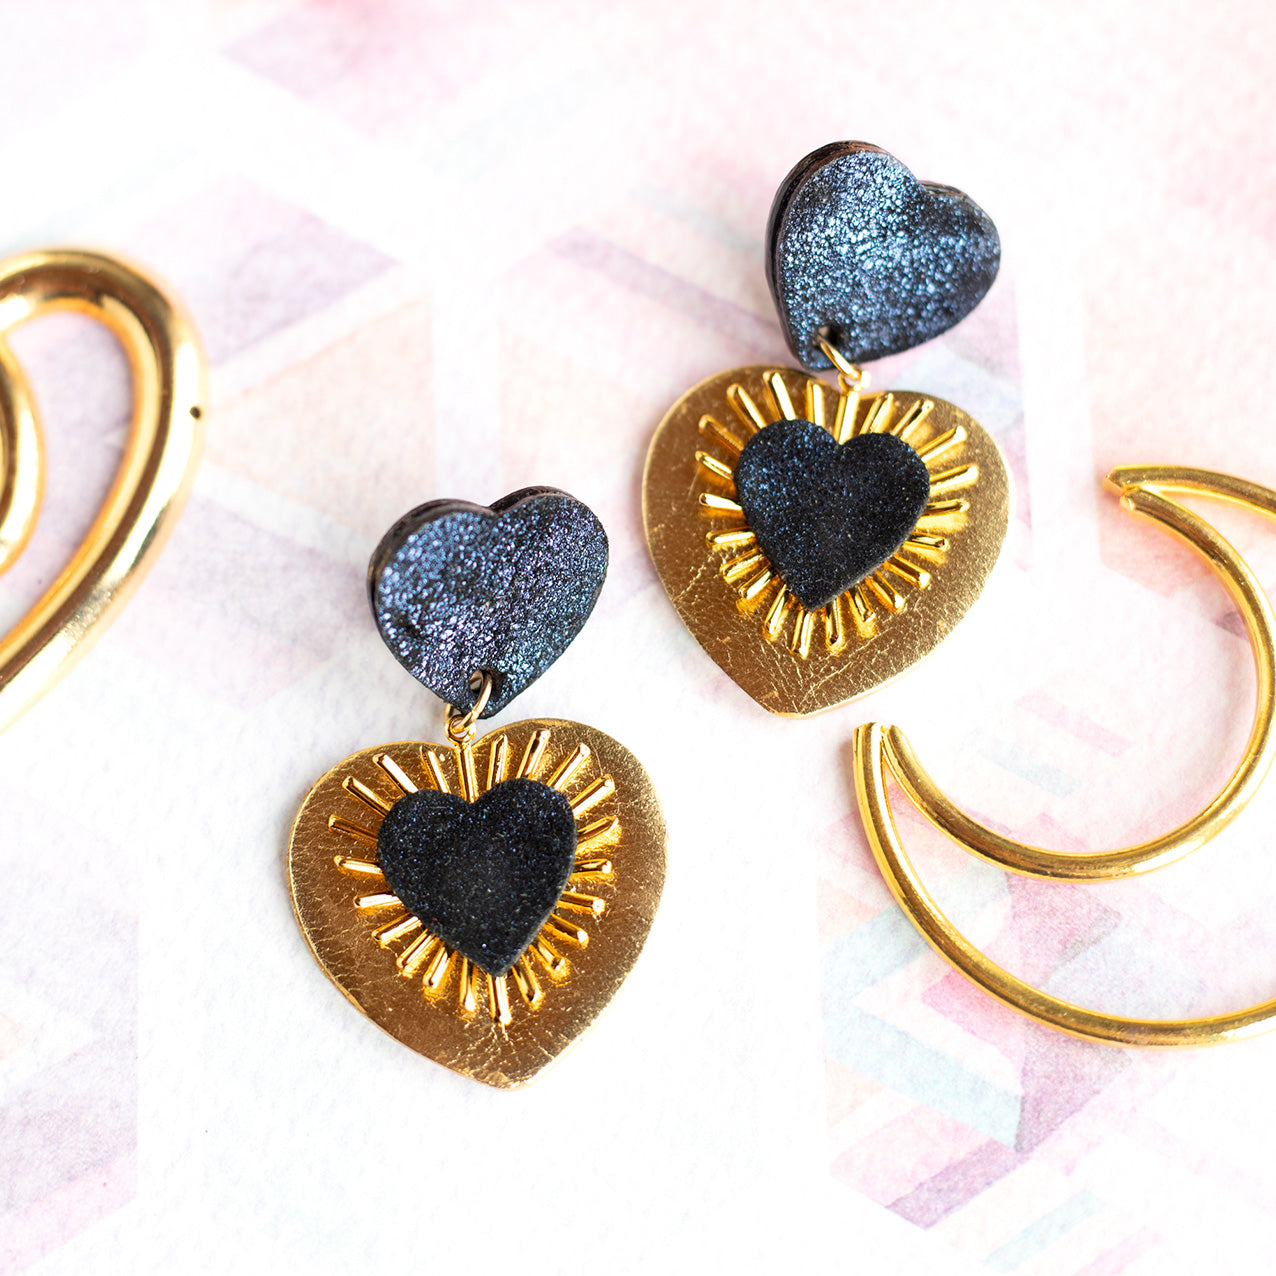 Sacré Coeur earrings in glittery midnight blue and gold leather